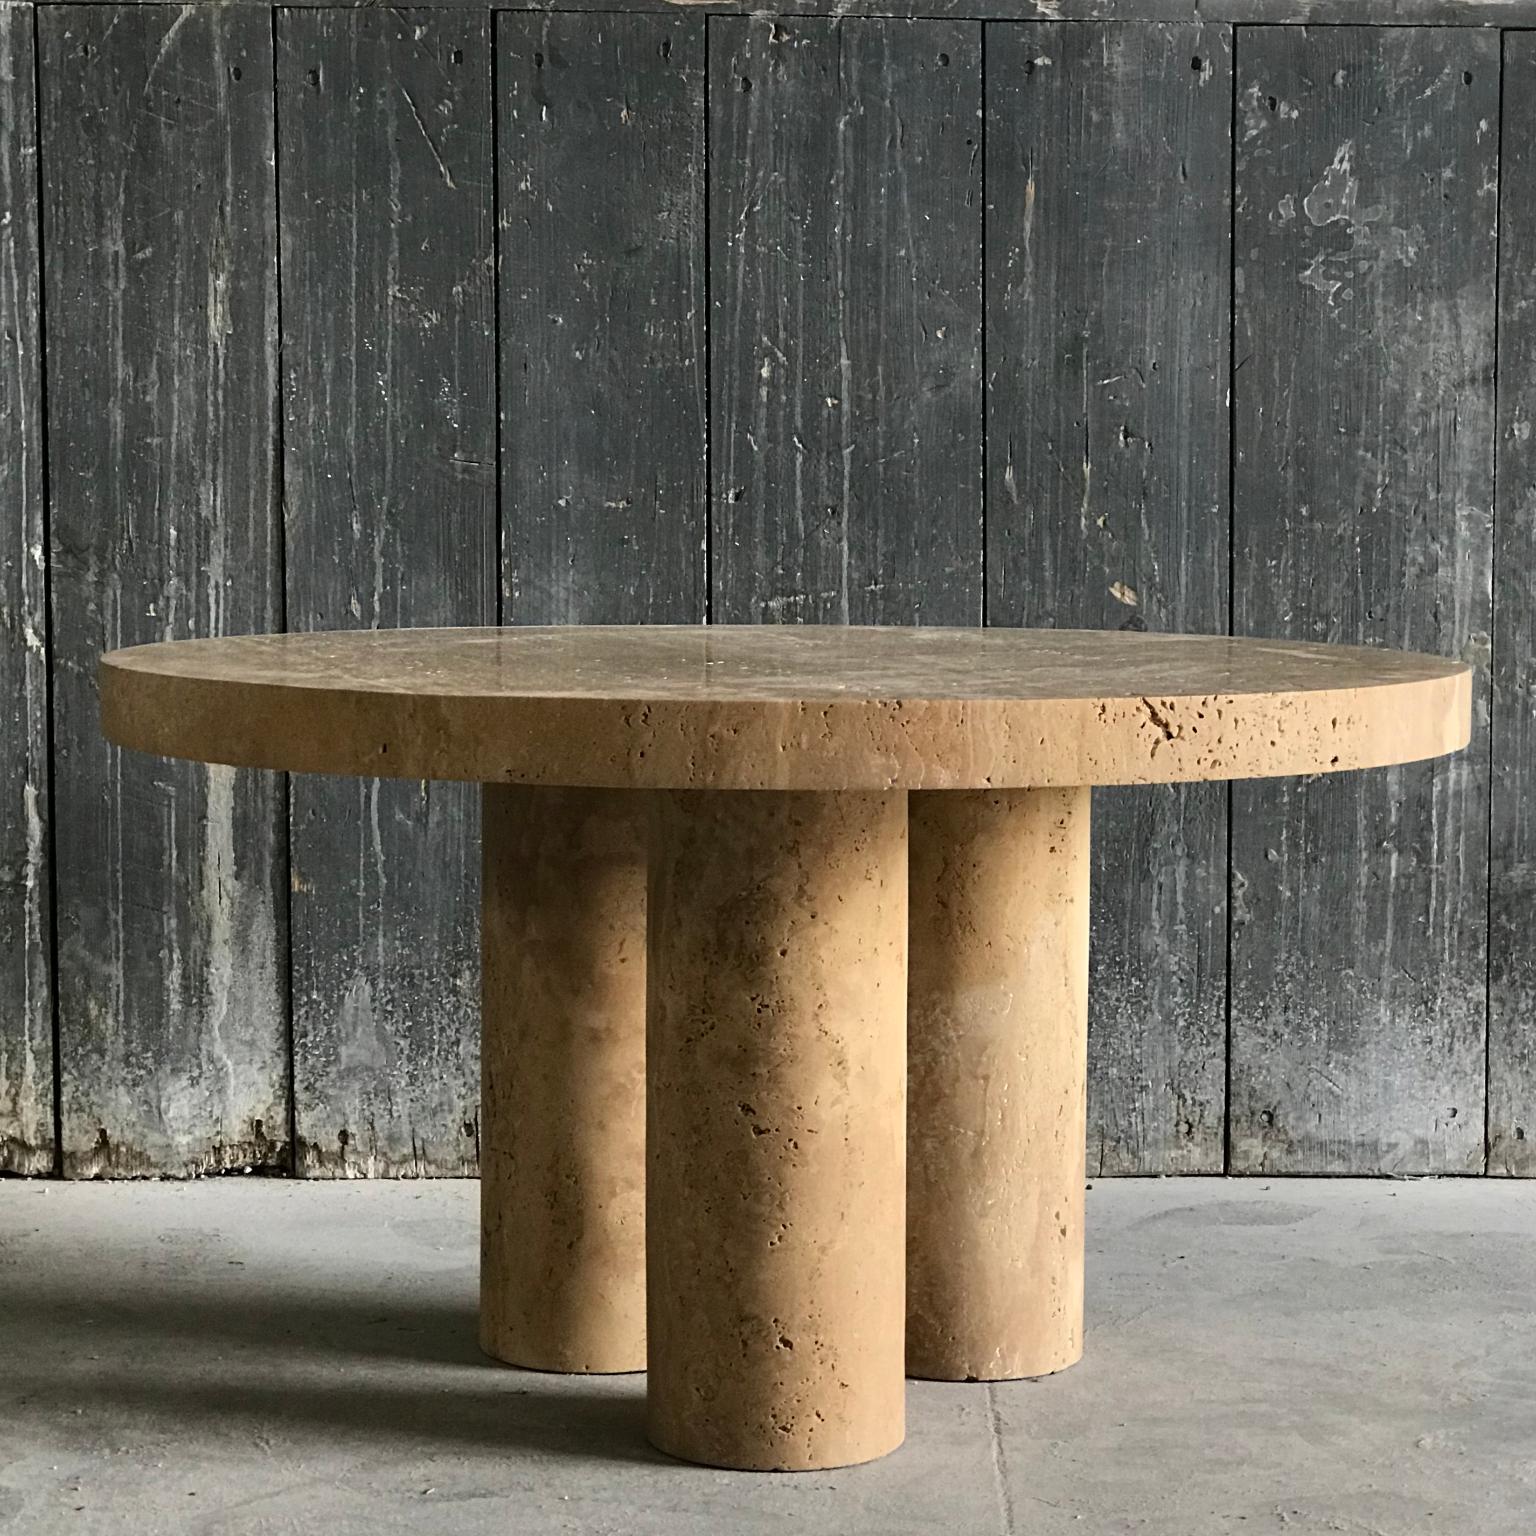 Sculptural cuddle coffee table 76 by Pietro Franceschini
Dimensions: Diameter 76 x Height 41 cm
Materials: Travertine

Pietro Franceschini is an architect and designer based in New York and Florence. He was educated in Italy, Portugal and United